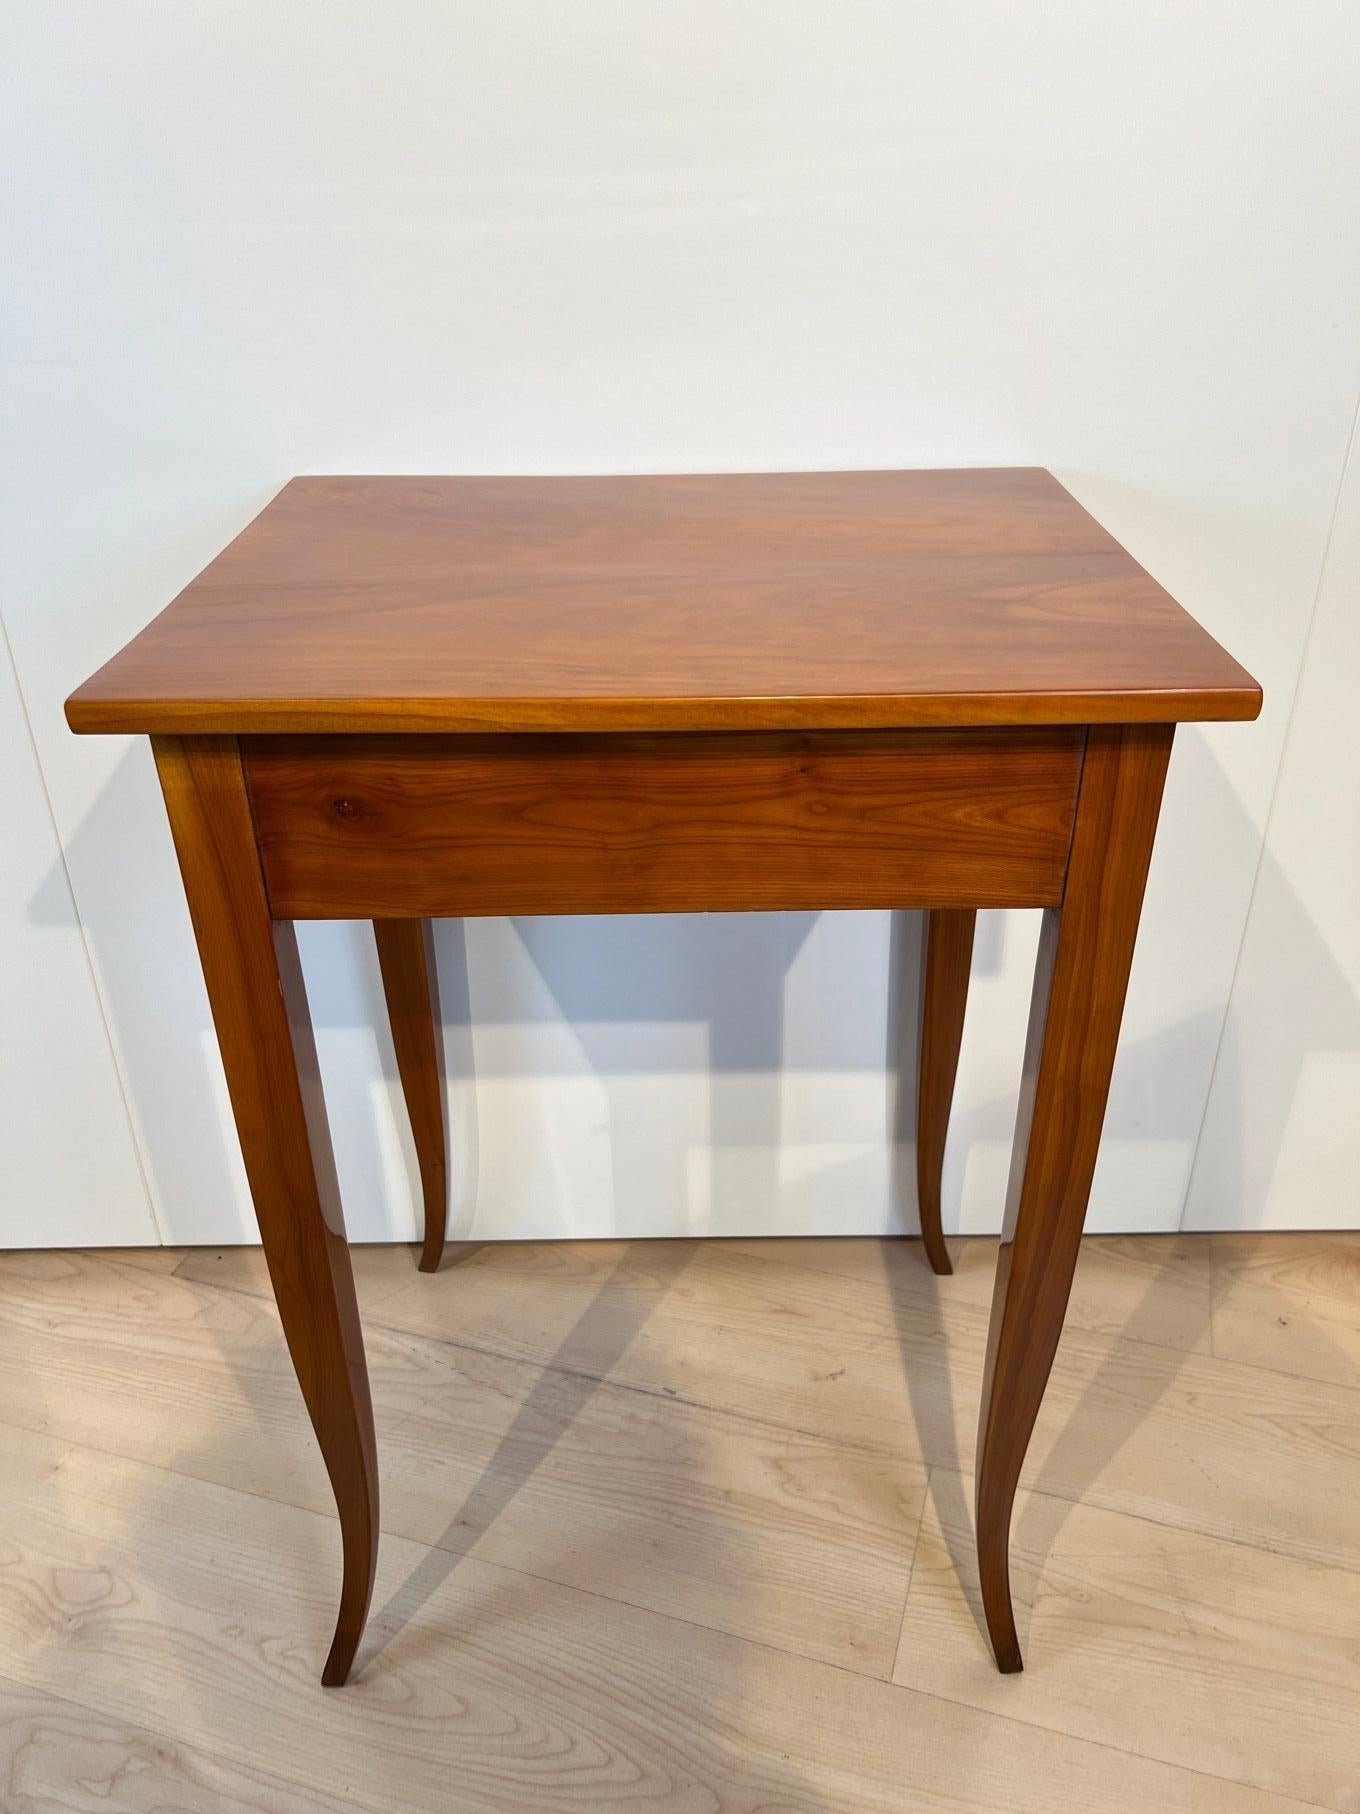 Biedermeier Side Table with Drawer, Cherry Wood, South Germany circa 1825 For Sale 11